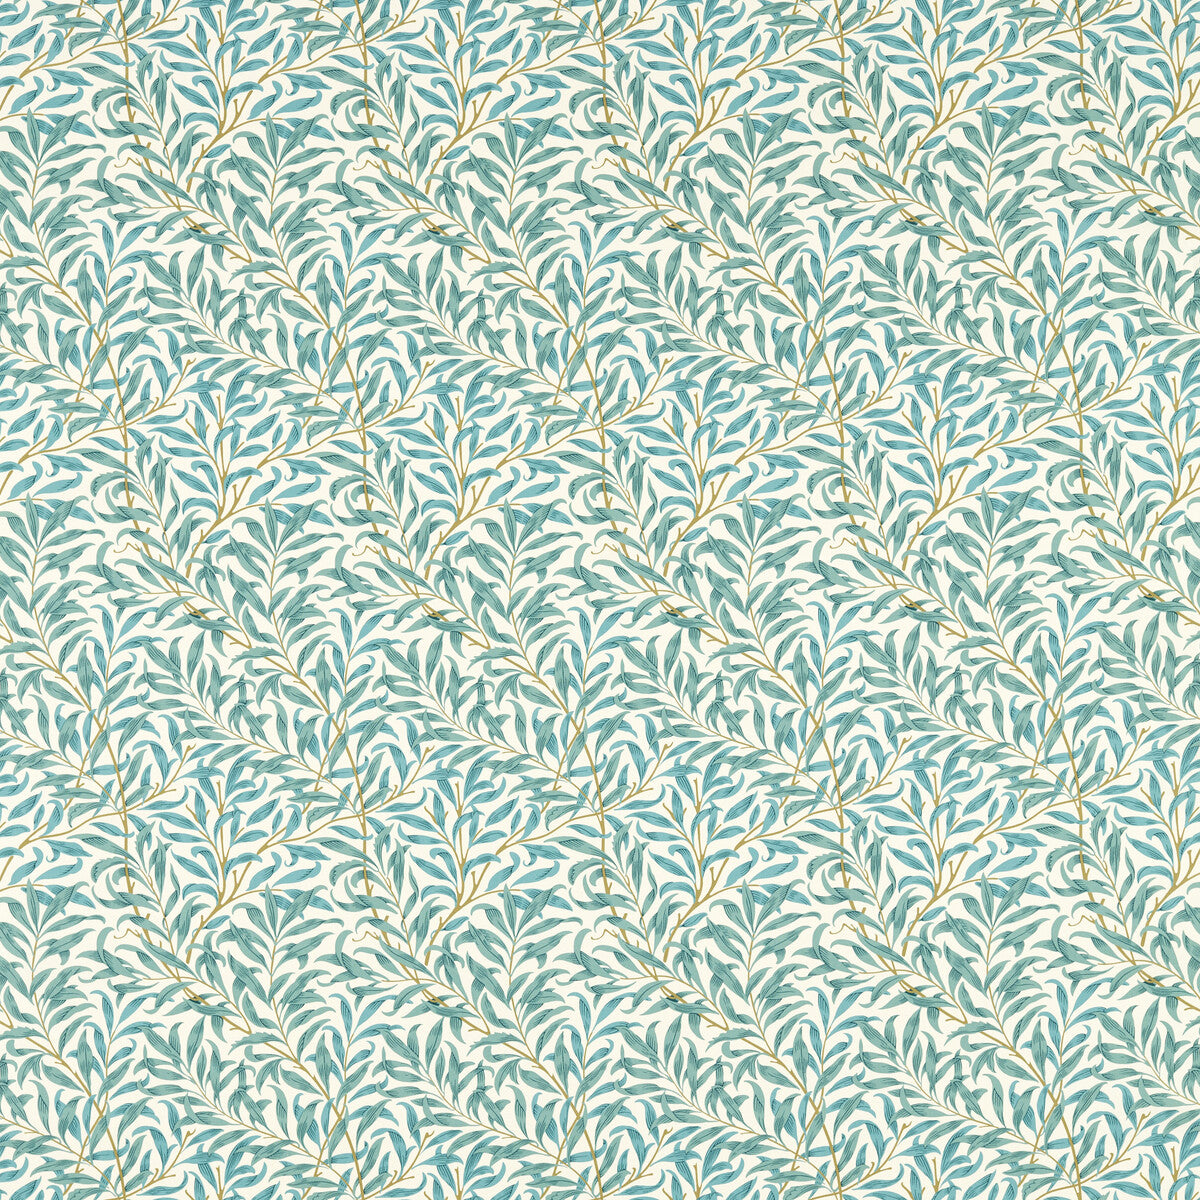 Willow Boughs fabric in teal color - pattern F1679/05.CAC.0 - by Clarke And Clarke in the Clarke &amp; Clarke William Morris Designs collection